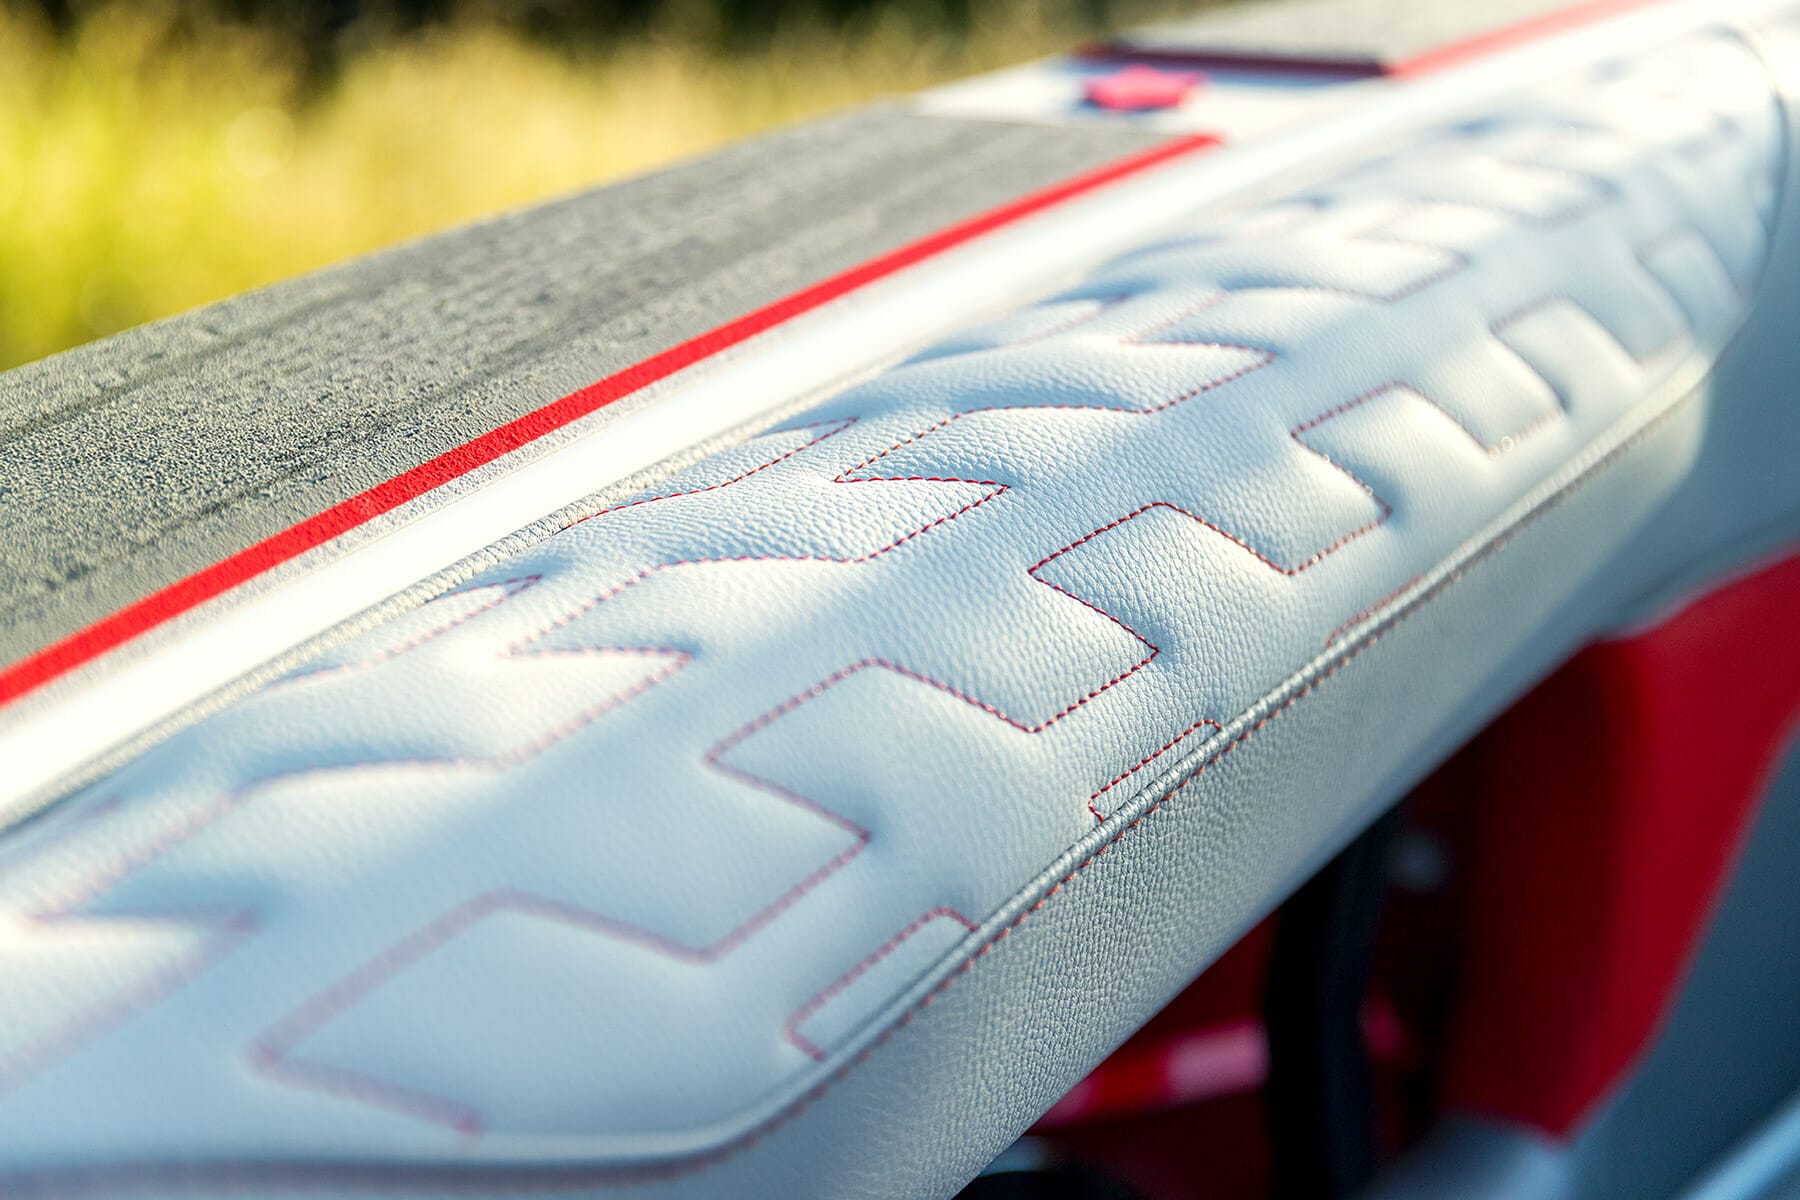 A close up of a wakesurf board seat with red and white stitching.